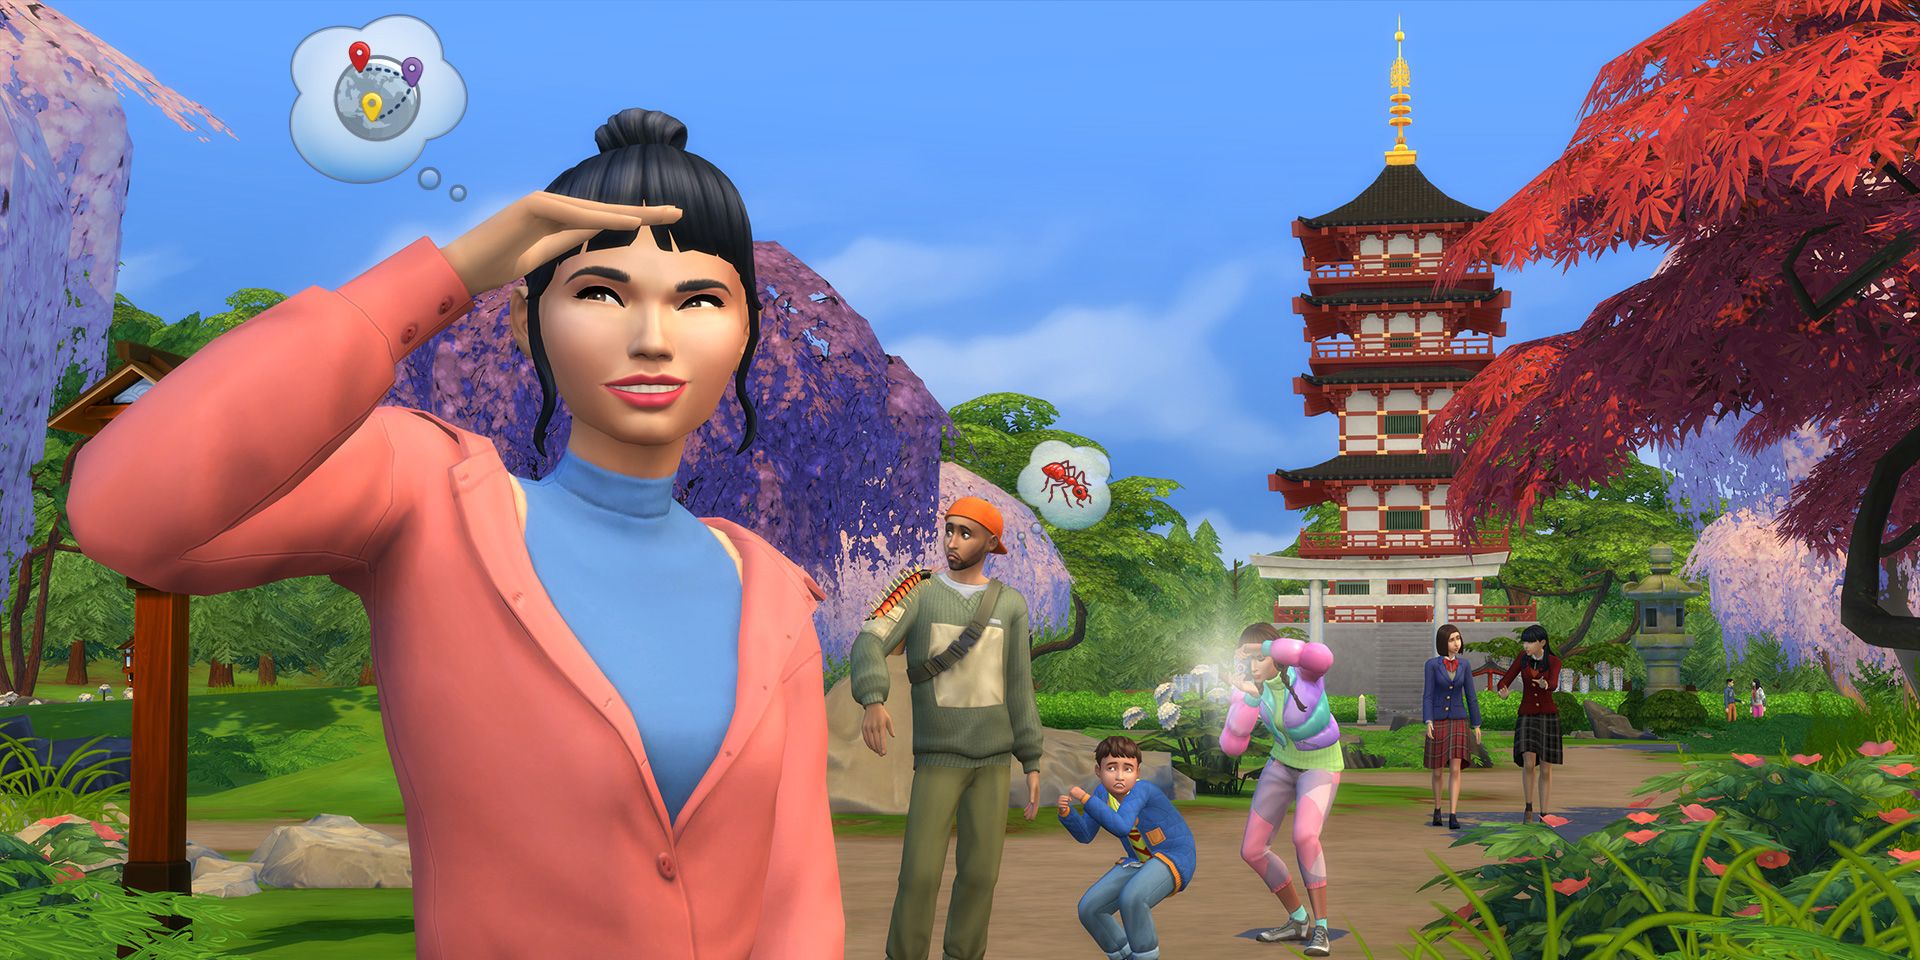 A female character with her head covering her eyes and a thinking cloud atop her head